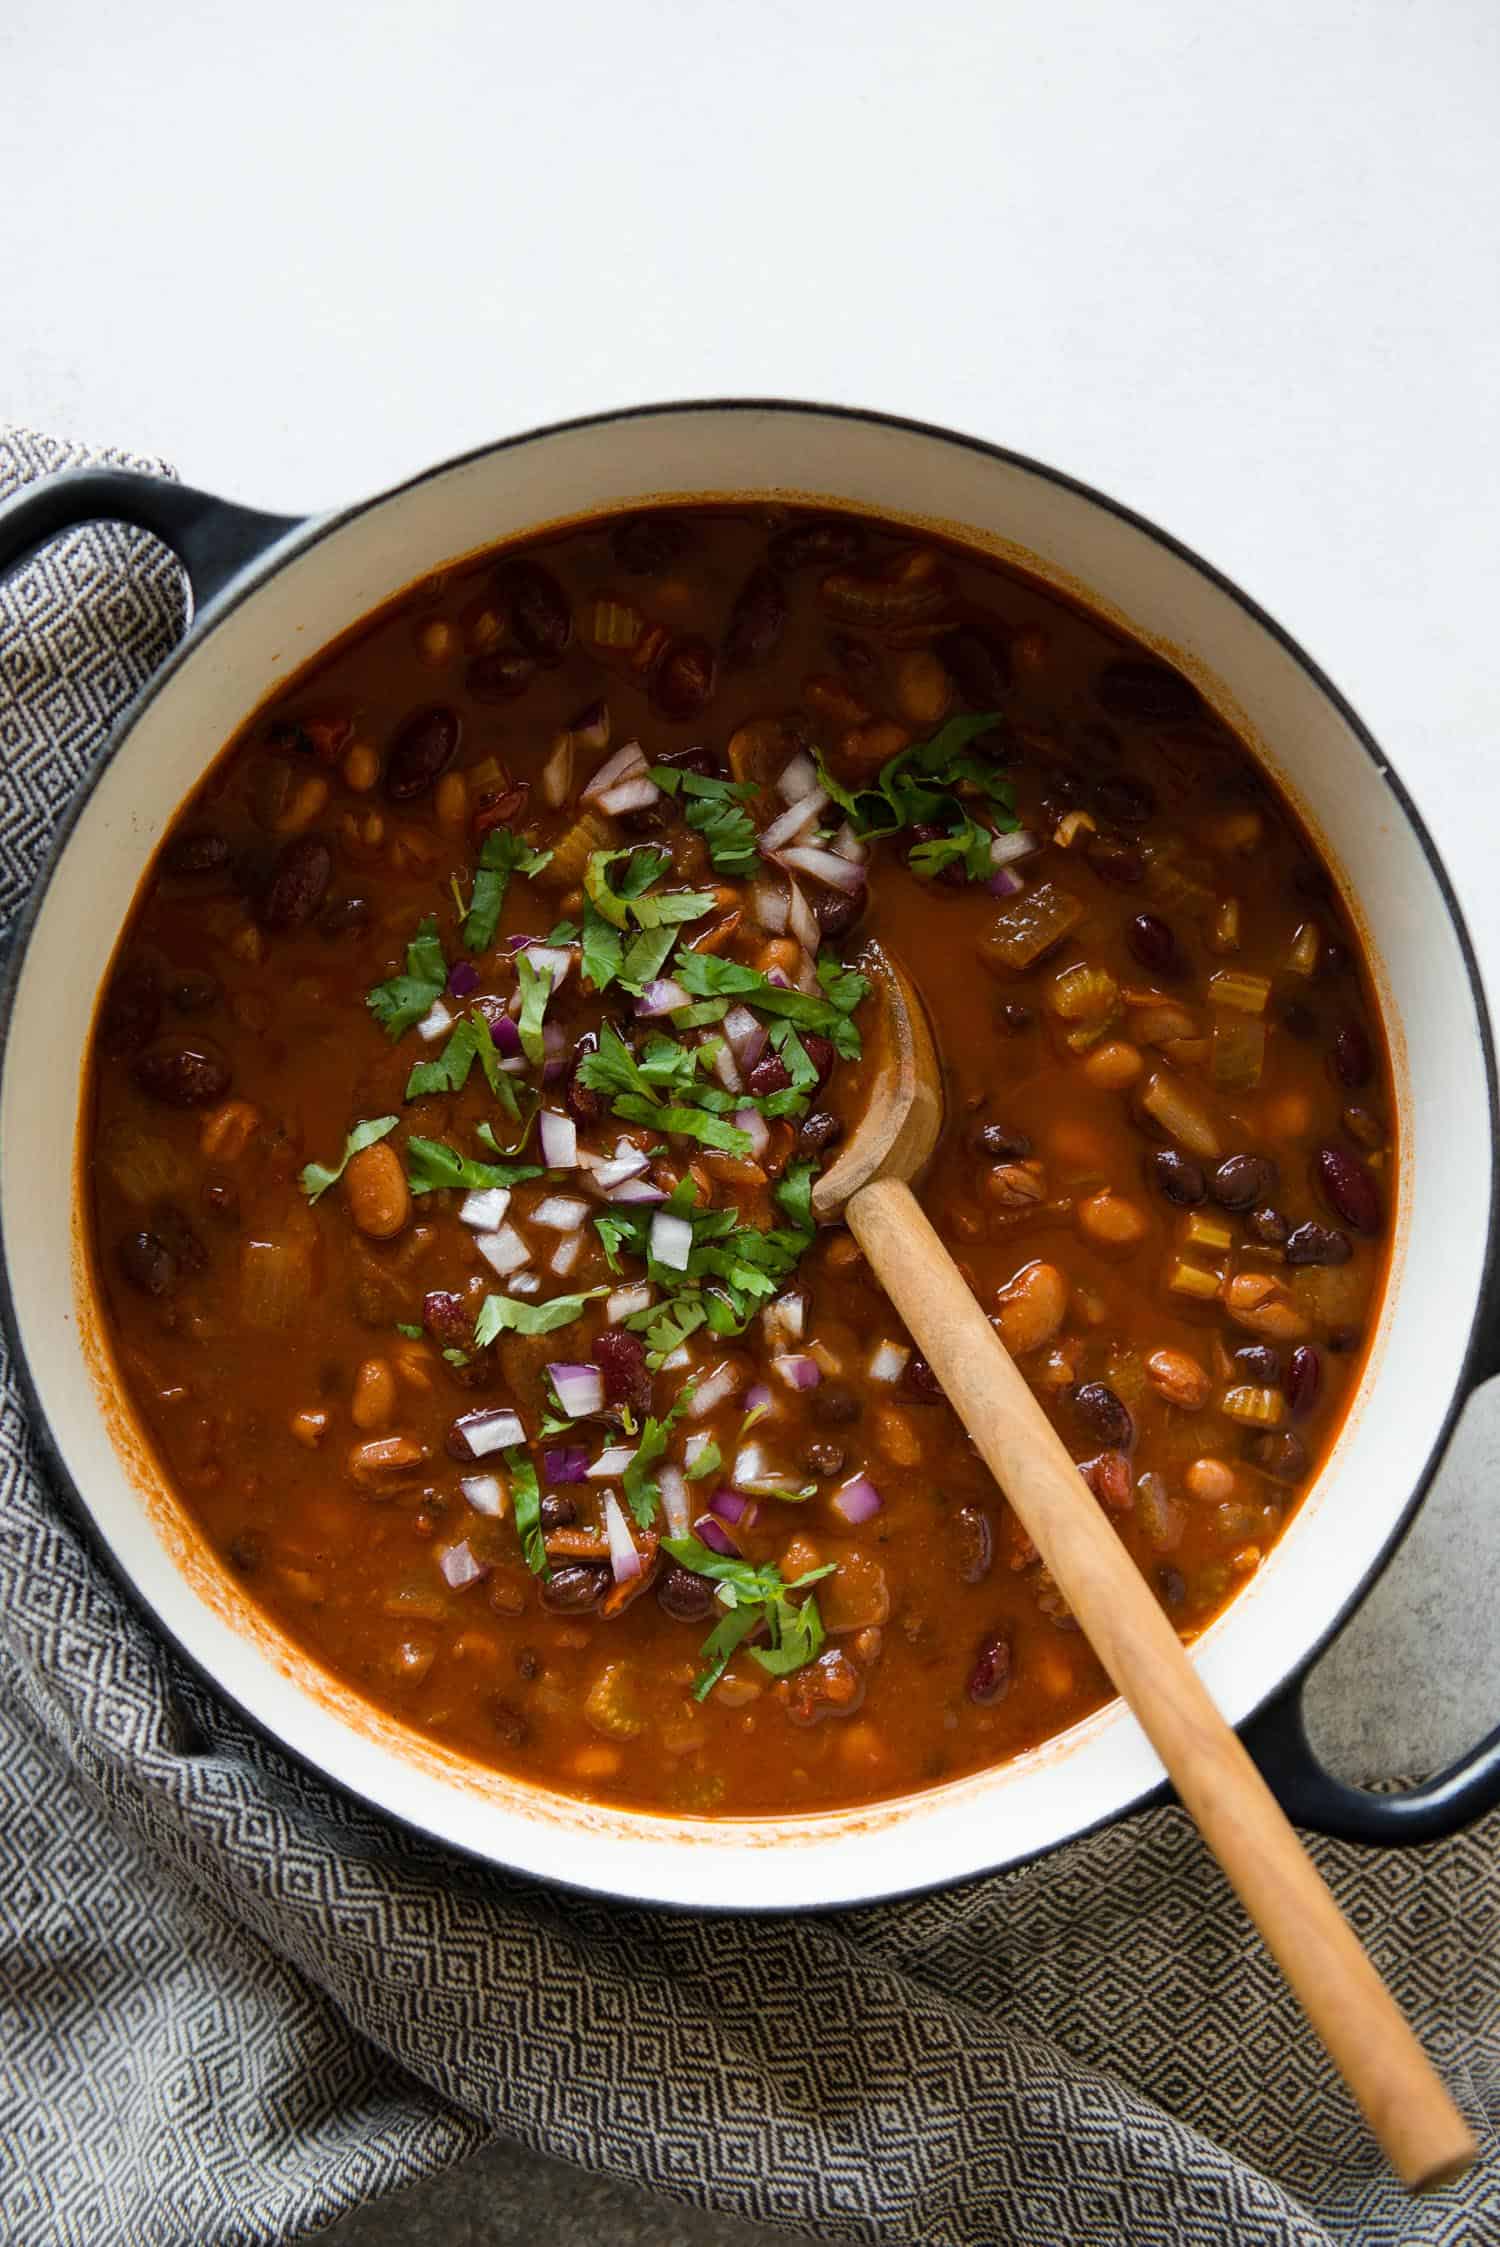 This hearty vegetarian three bean chili is packed with vegetable protein from three varieties of beans: chickpeas, kidney beans and black beans. 